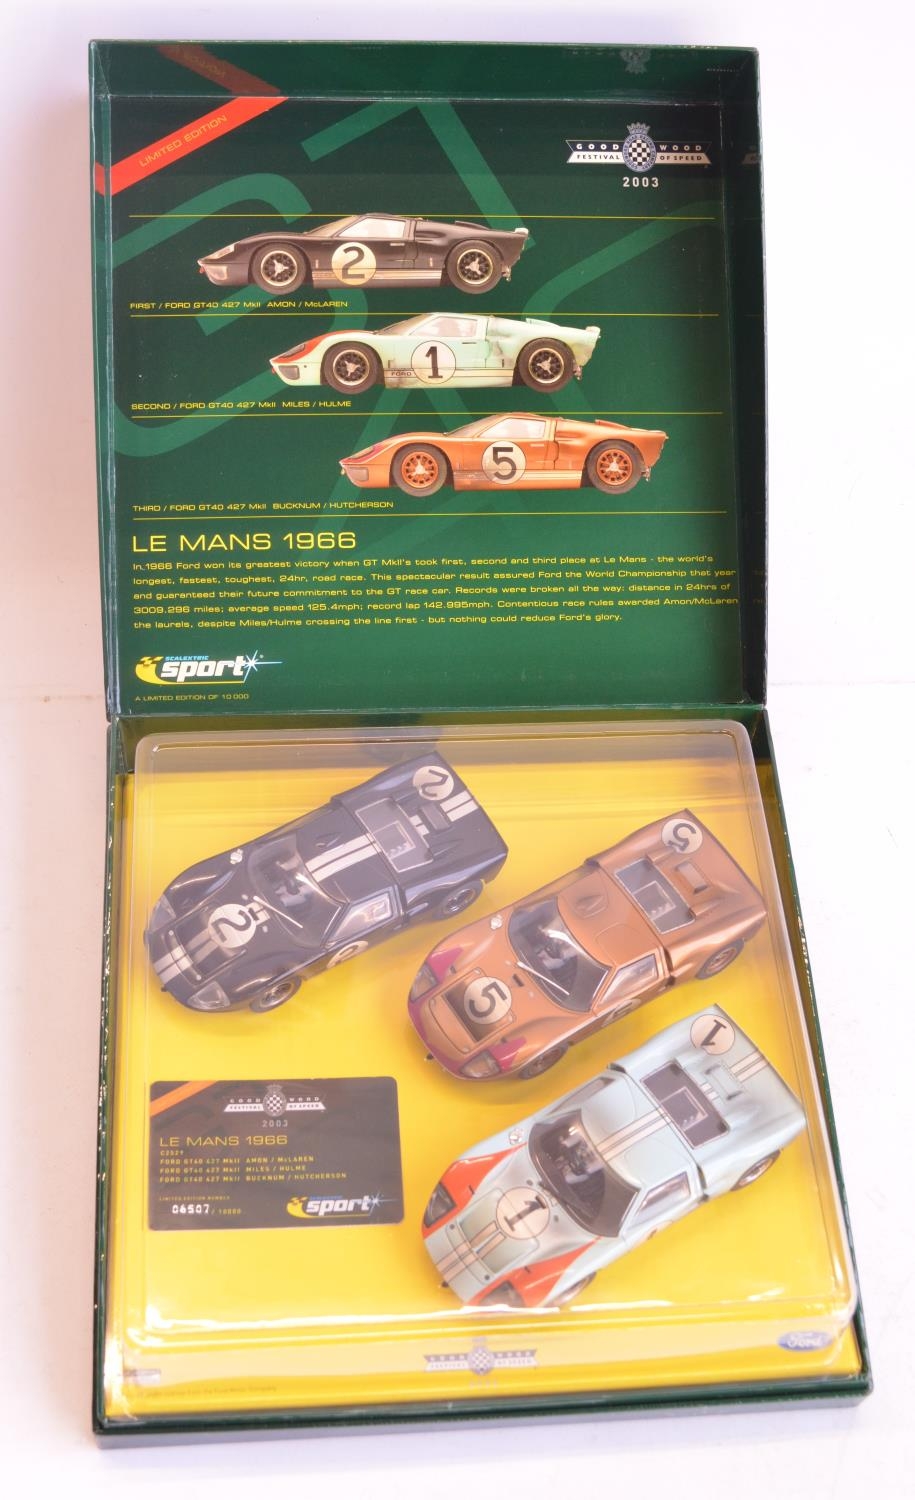 Scalextric C2529 limited edition Goodwood Festival Of Speed Le Mans 1966 3 Ford GT40 (weathered) car - Image 2 of 5